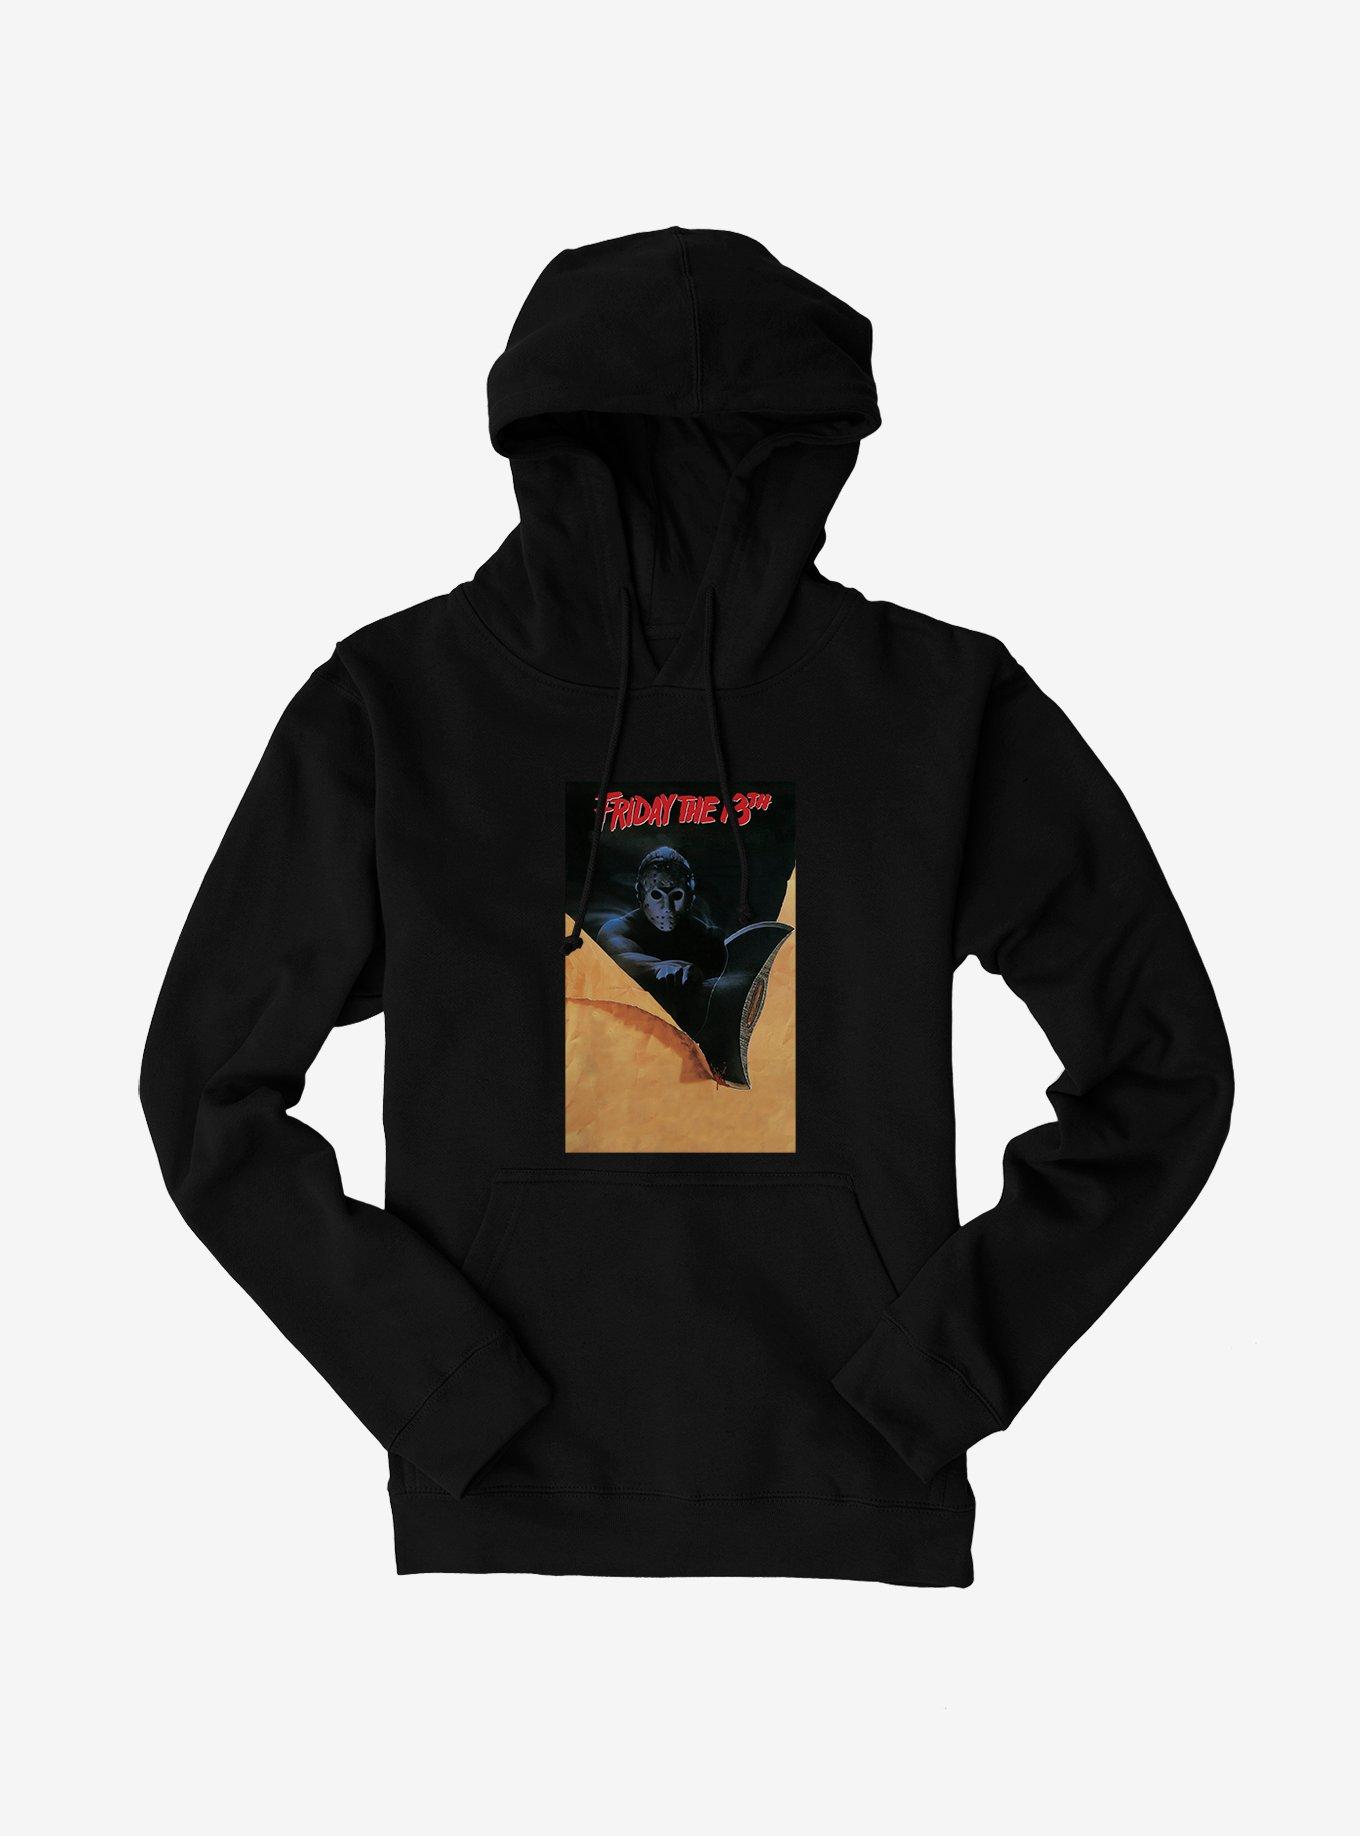 Friday The 13th Poster Hoodie | BoxLunch